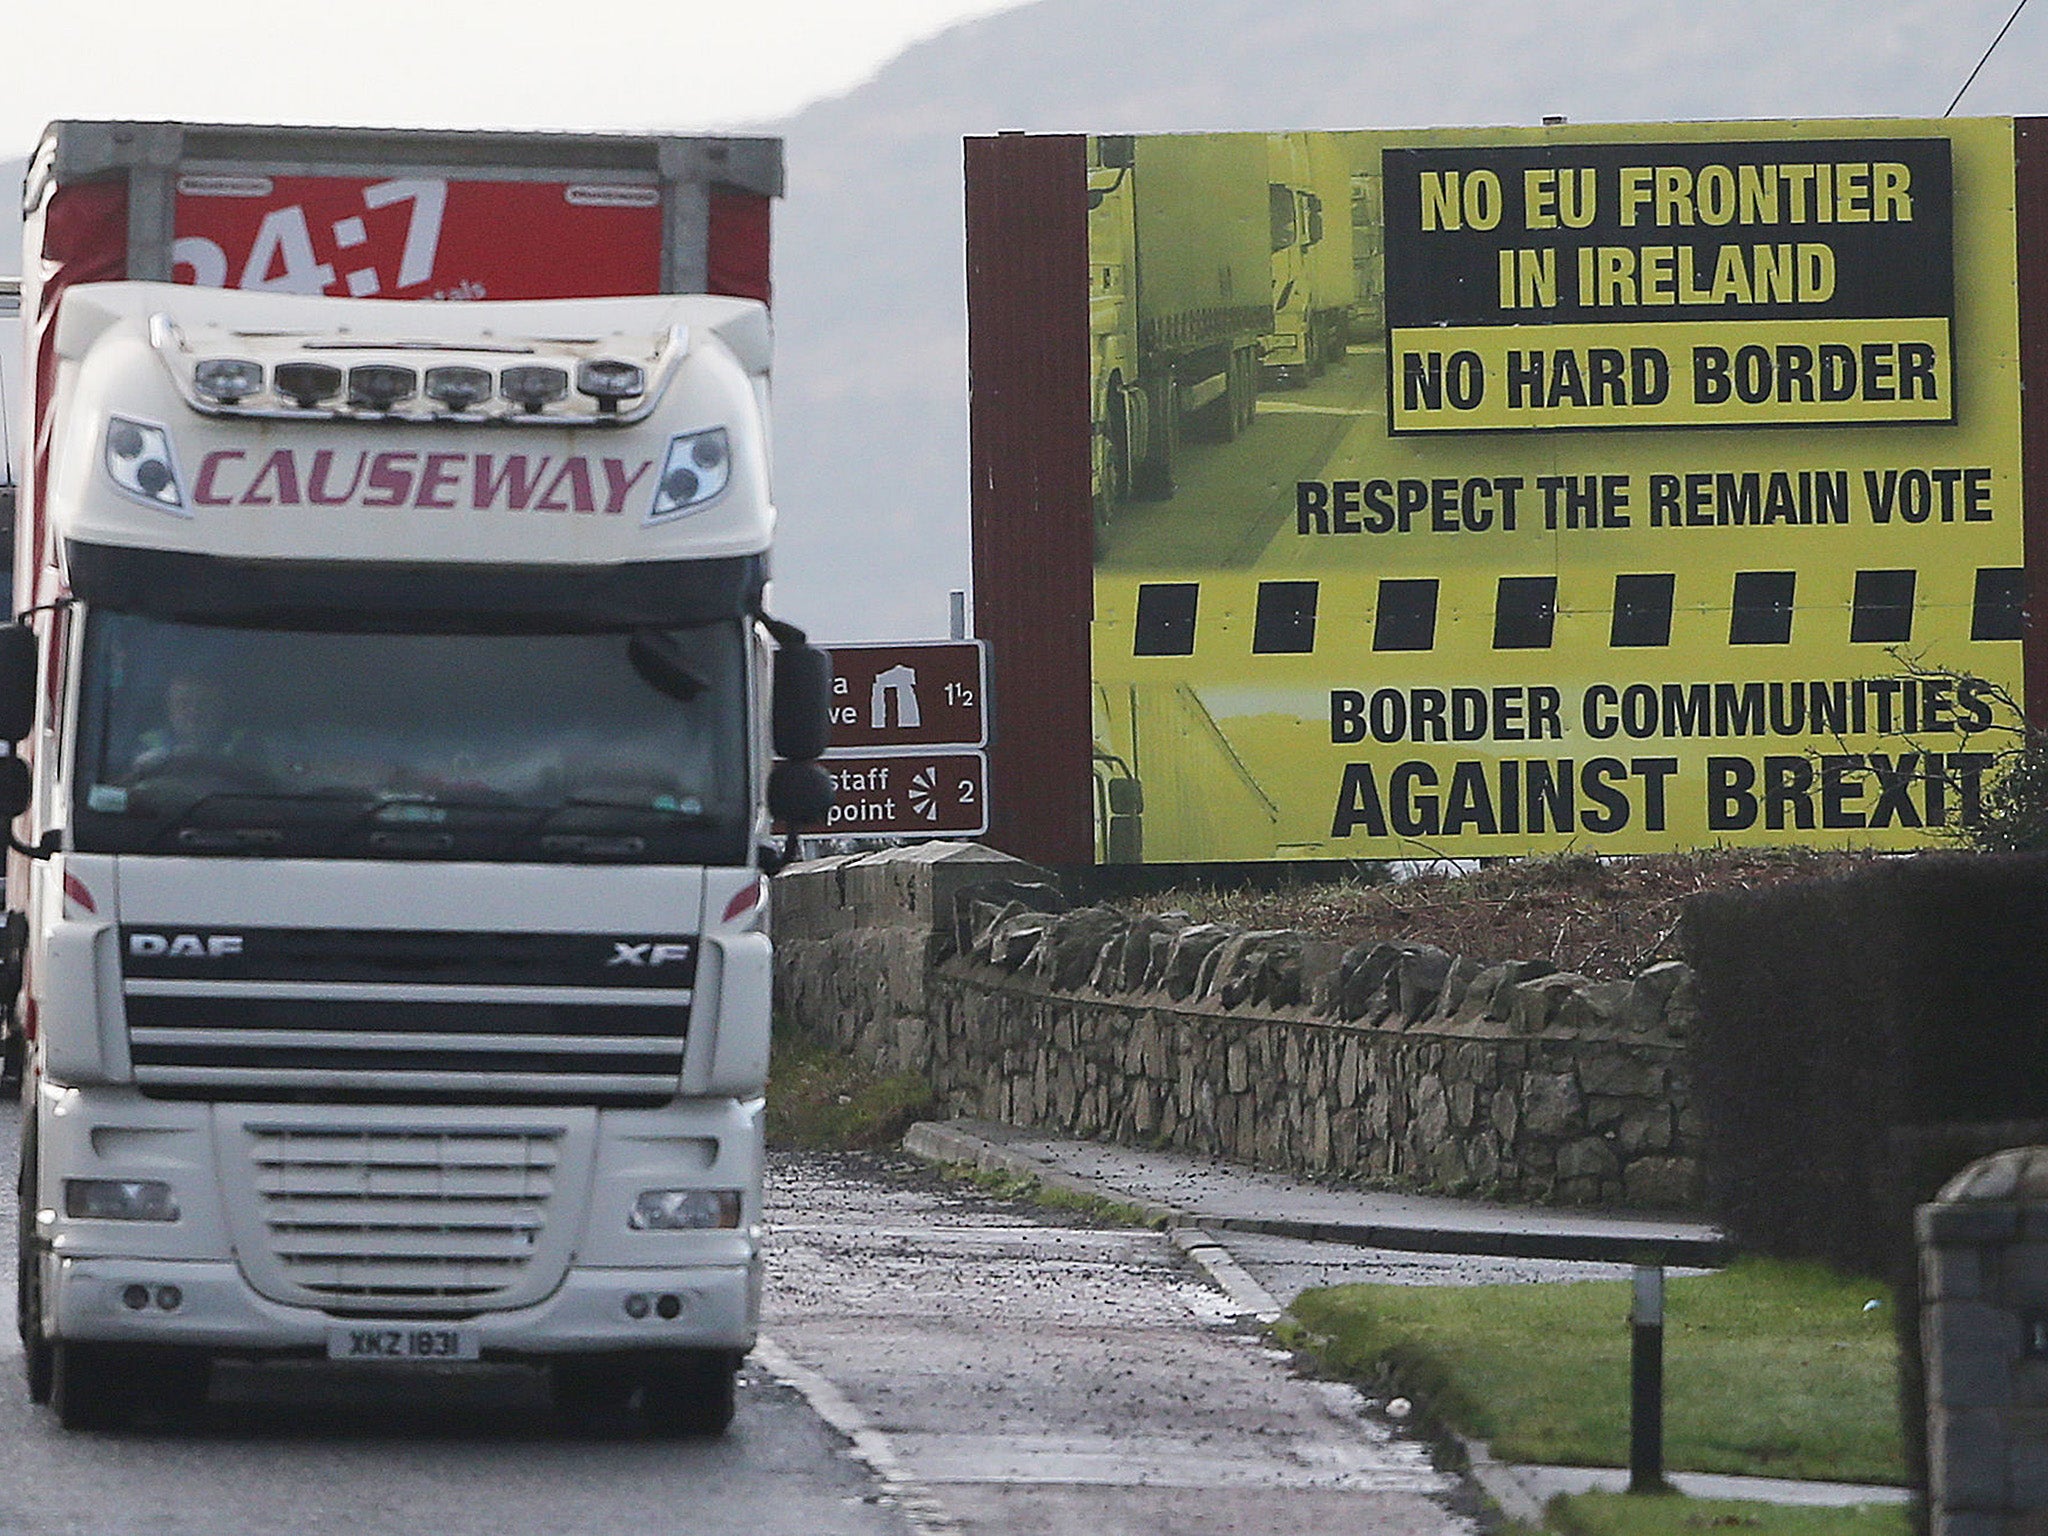 A truck passes a Brexit billboard in Jonesborough, Co Armagh, on the northern side of the border between Northern Ireland and the Republic of Ireland